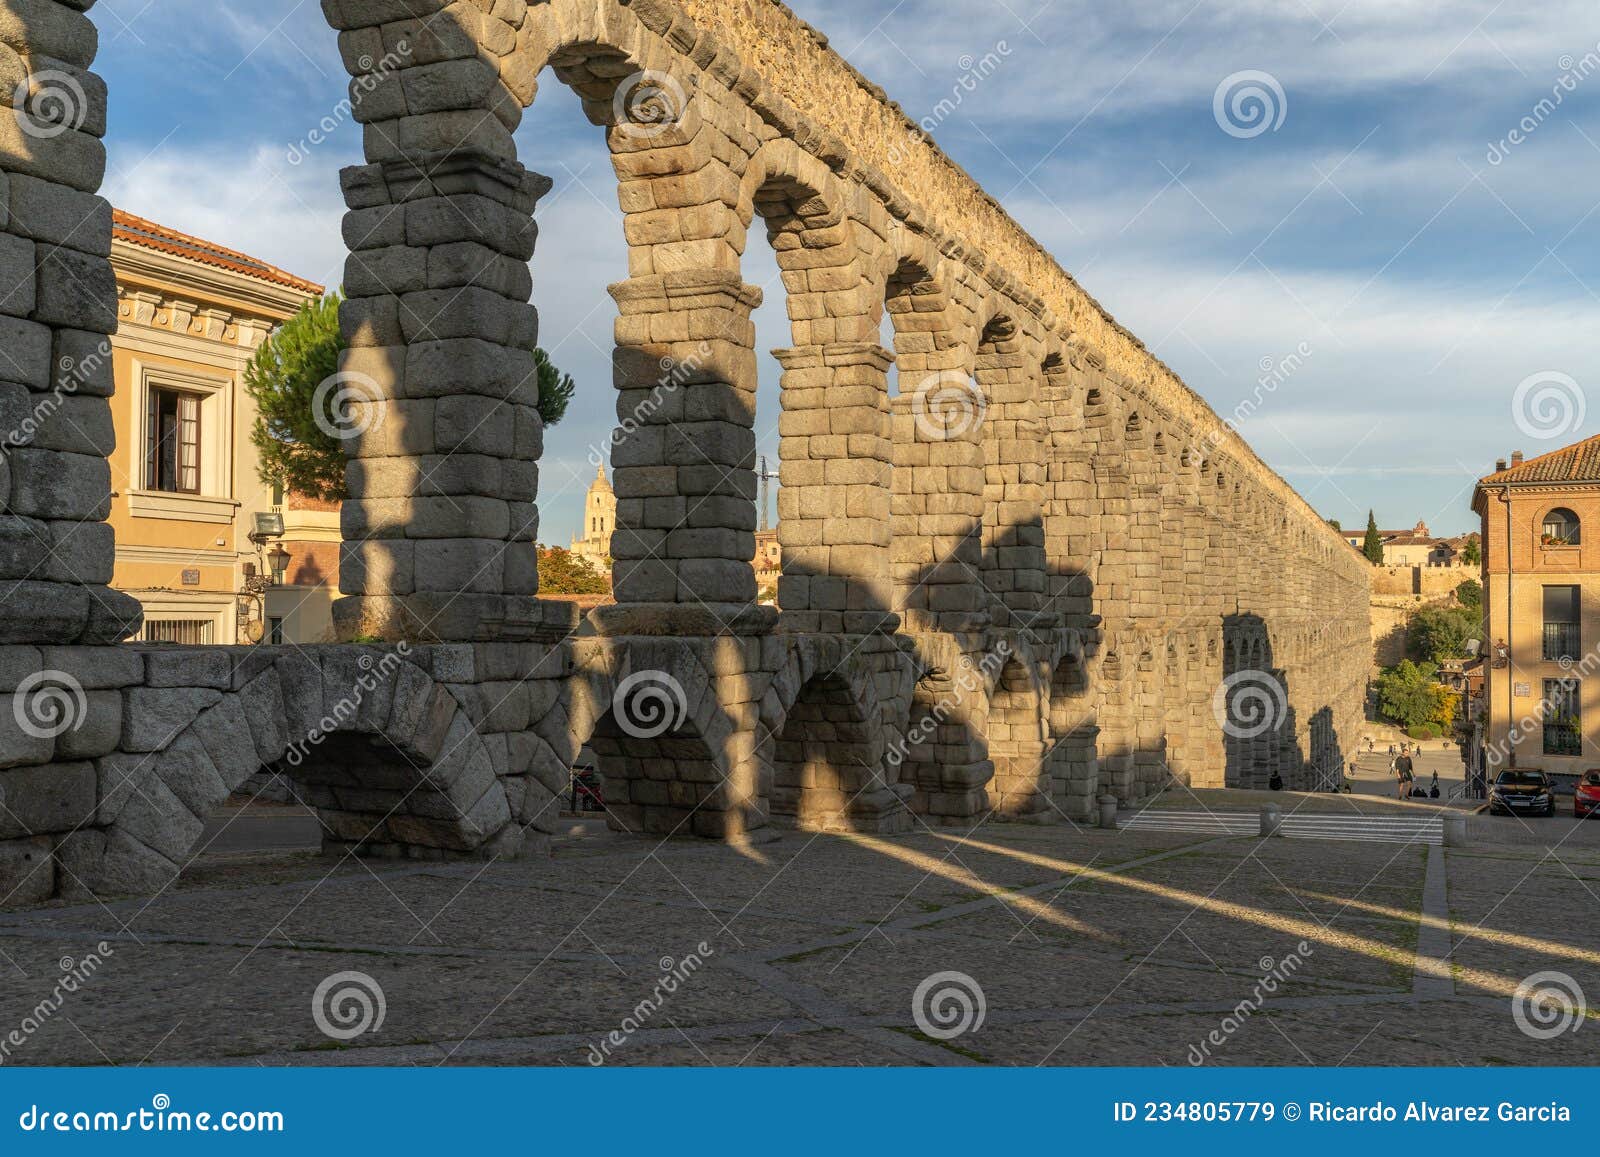 view of the famous aqueduct of segovia in spain